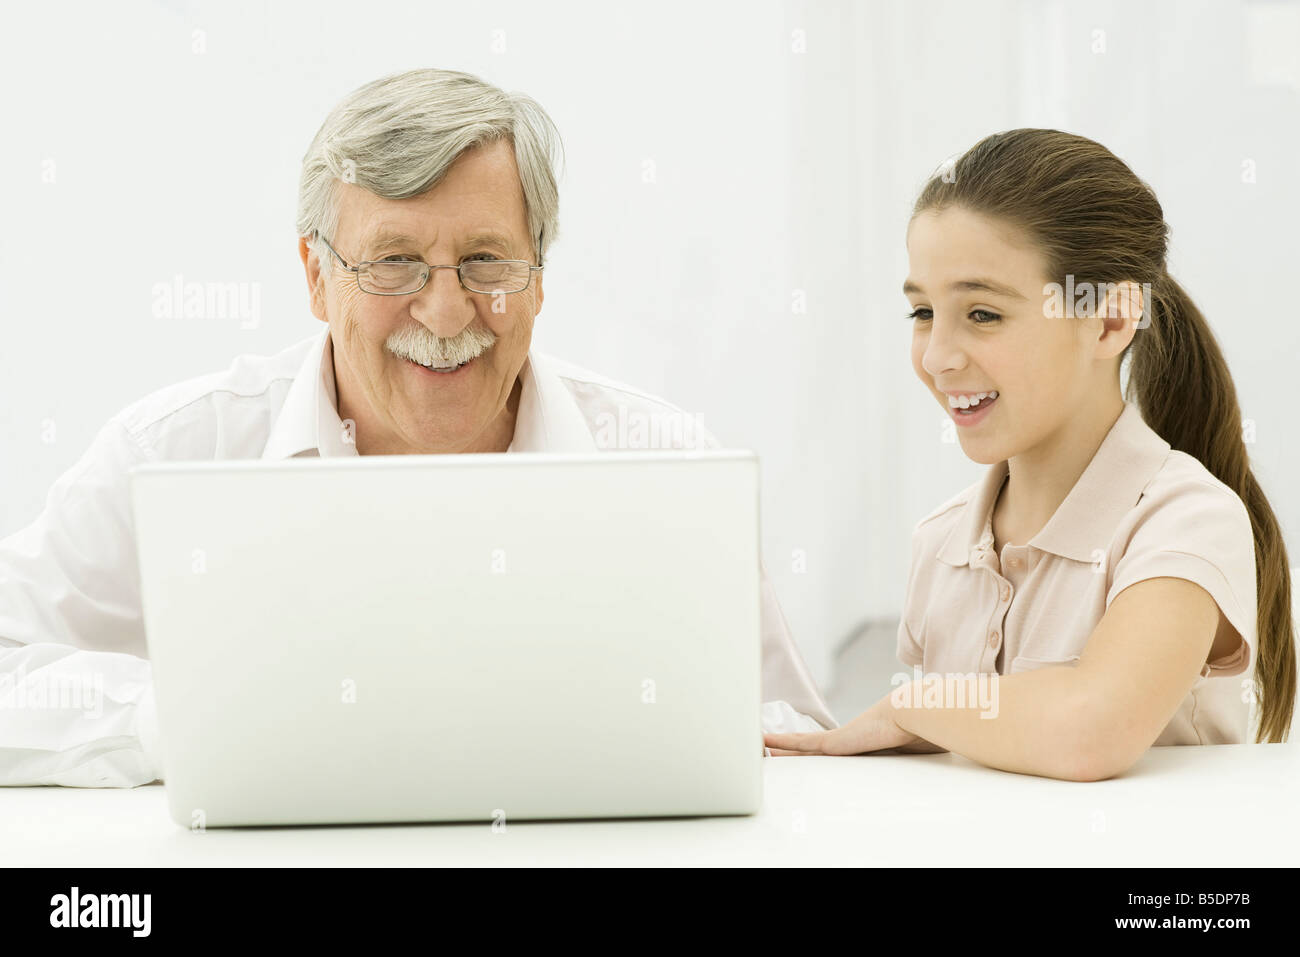 Grandfather and granddaughter looking at laptop together Stock Photo